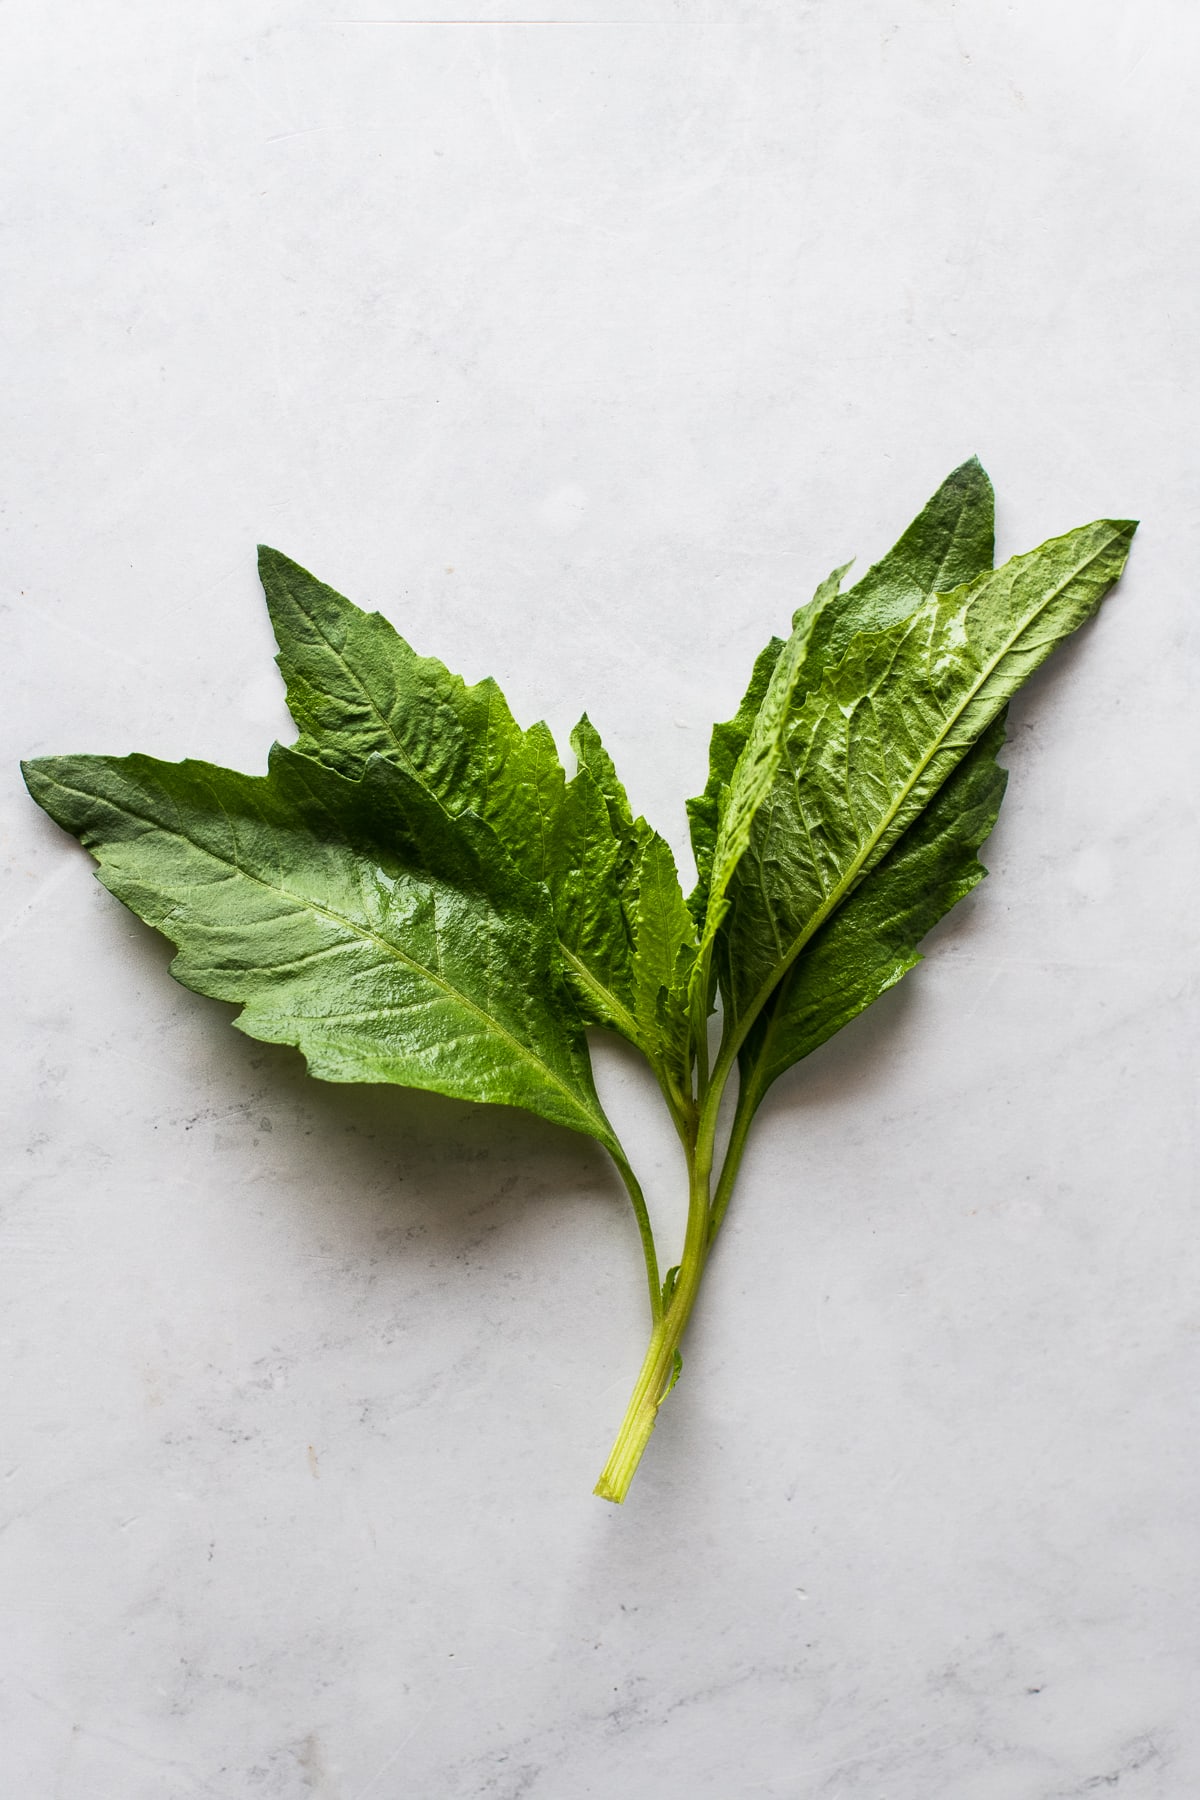 A small sprig of fresh epazote leaves on a marble countertop.